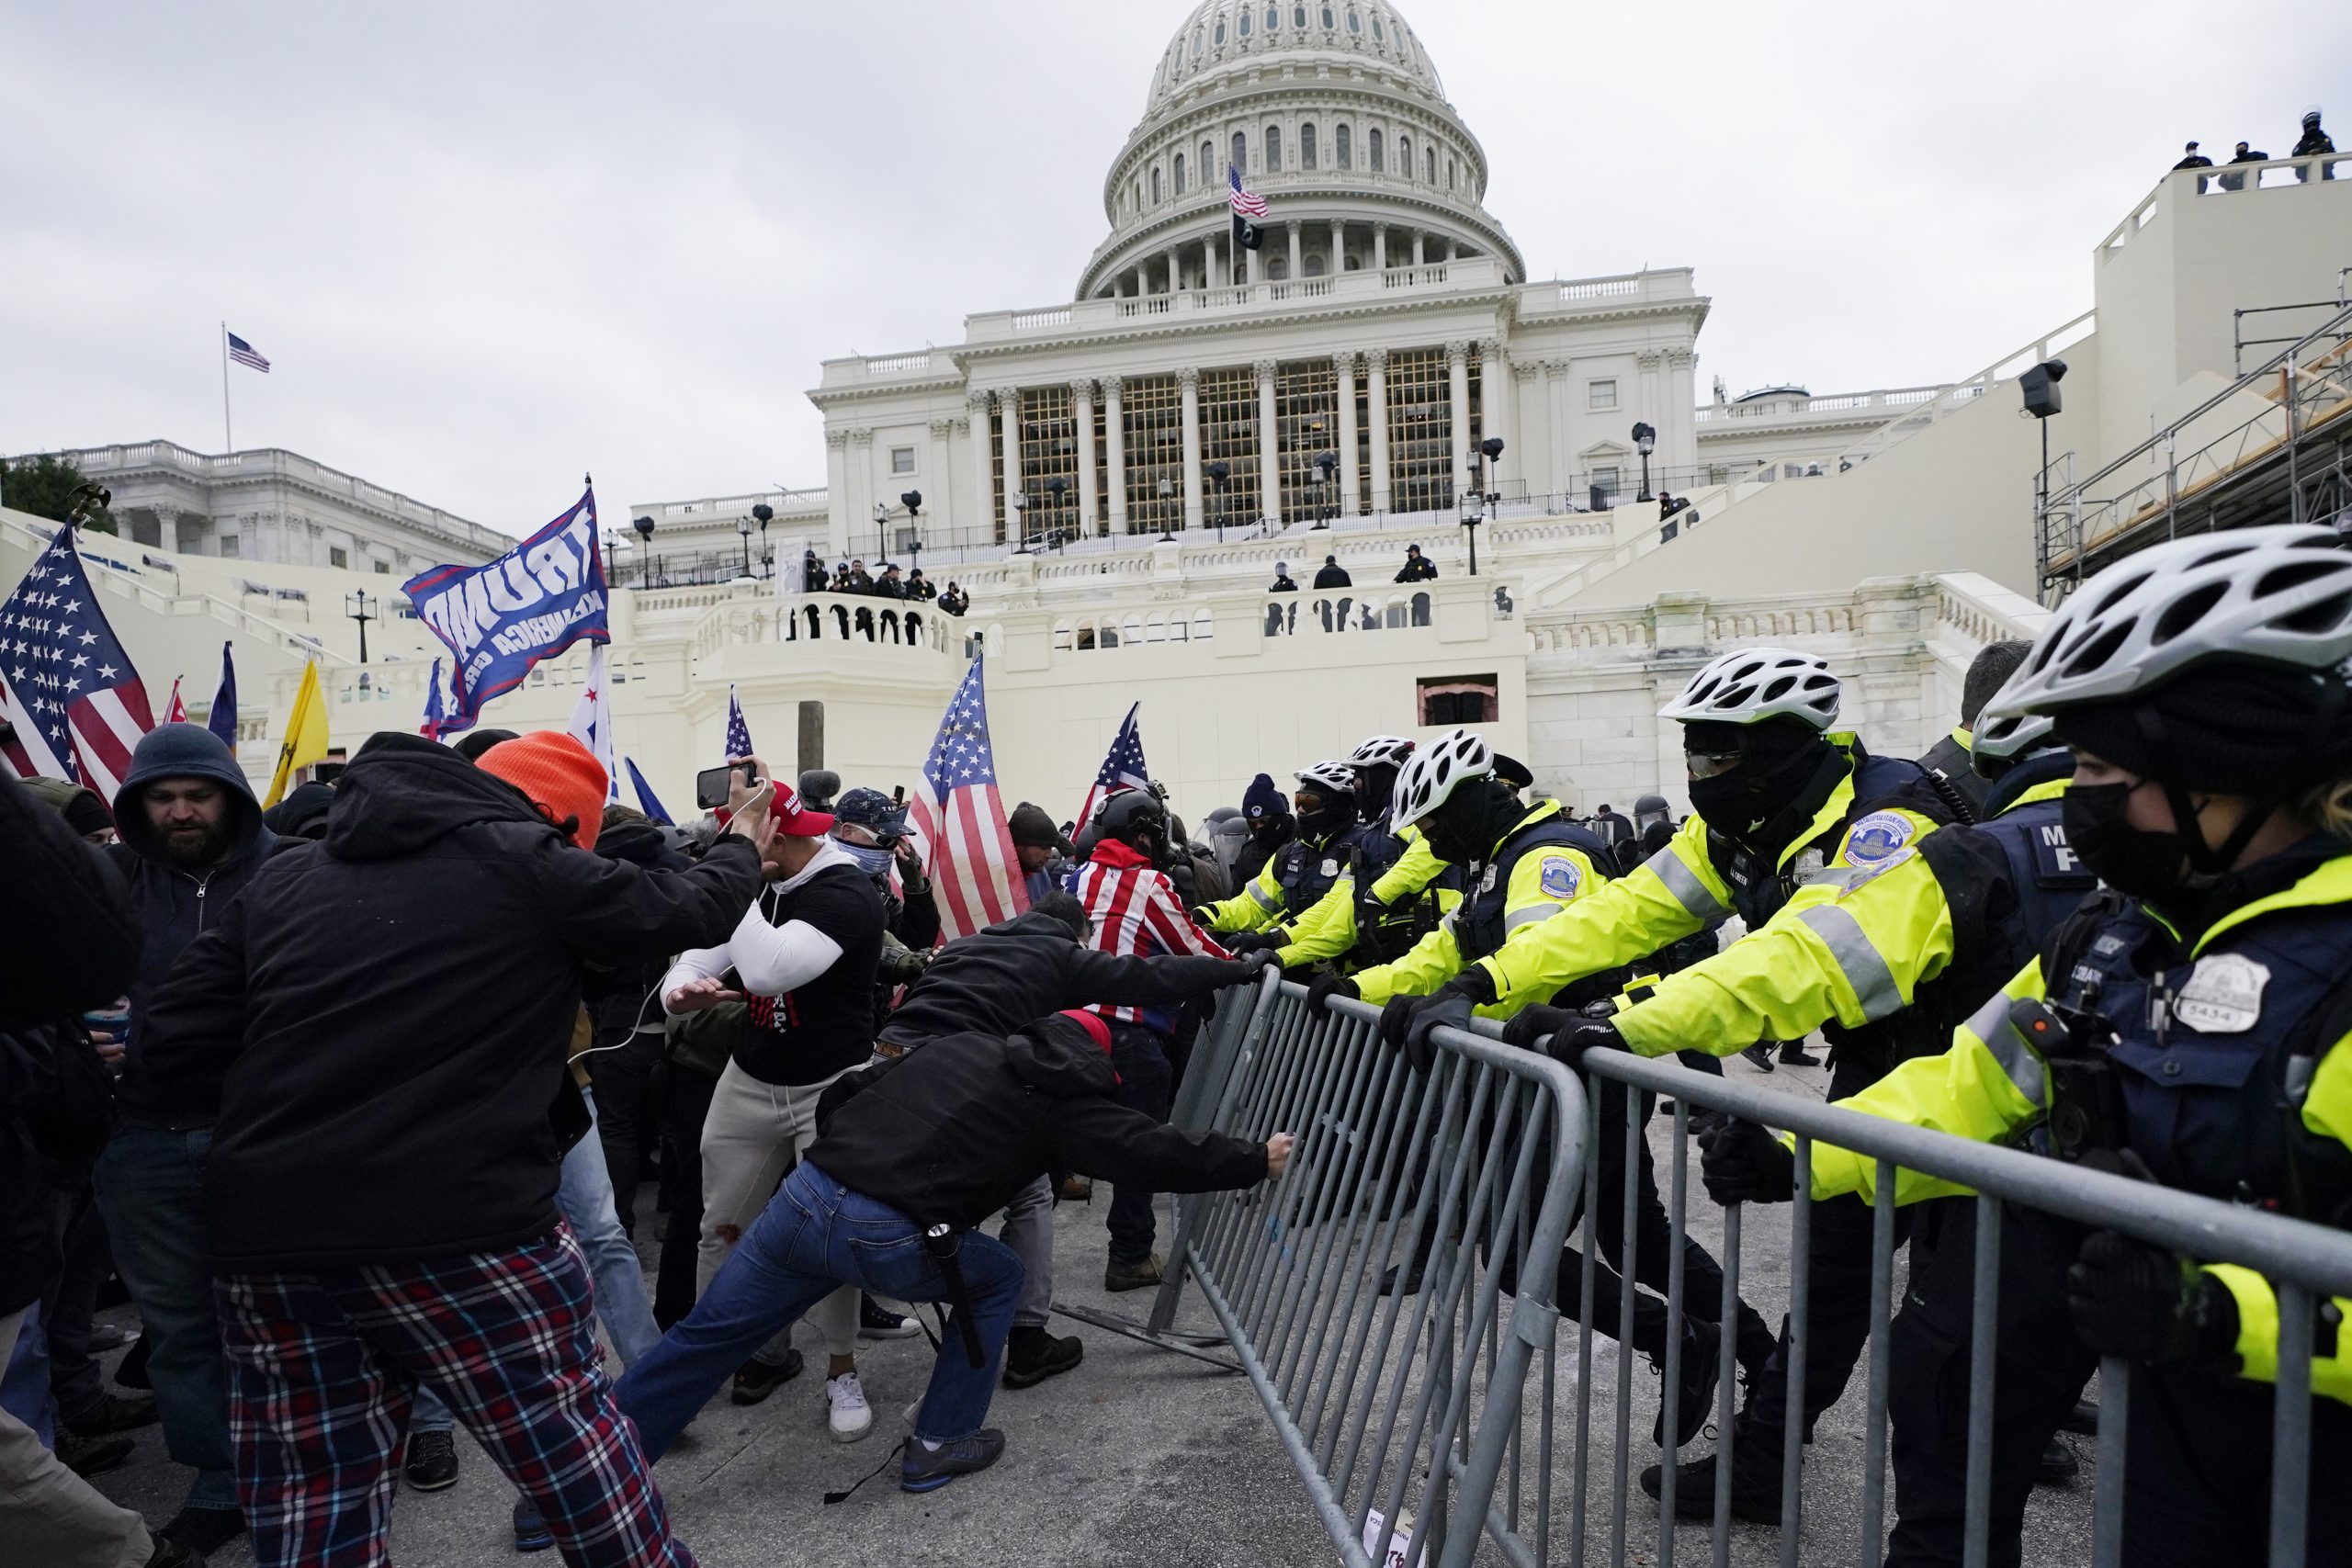 Trump supporters try to break through a police barrier, Wednesday, Jan. 6, 2021, at the Capitol in Washington. As Congress prepares to affirm President-elect Joe Biden's victory, thousands of people have gathered to show their support for President Donald Trump and his claims of election fraud.